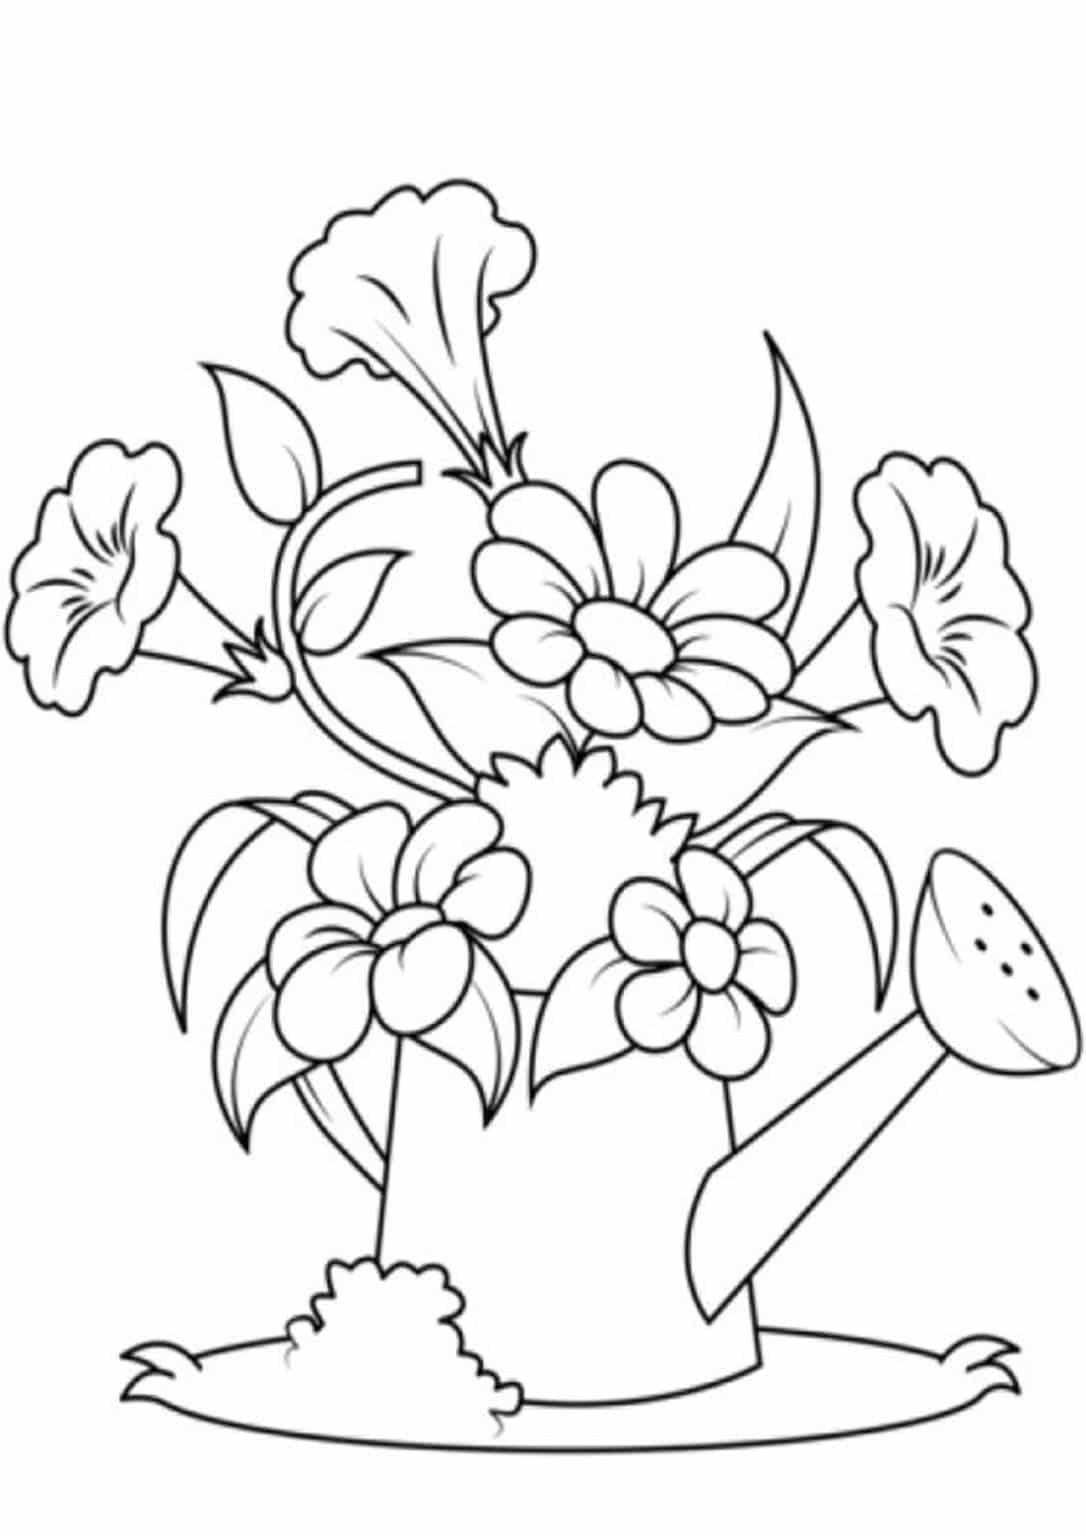 Printable Flowers For Coloring